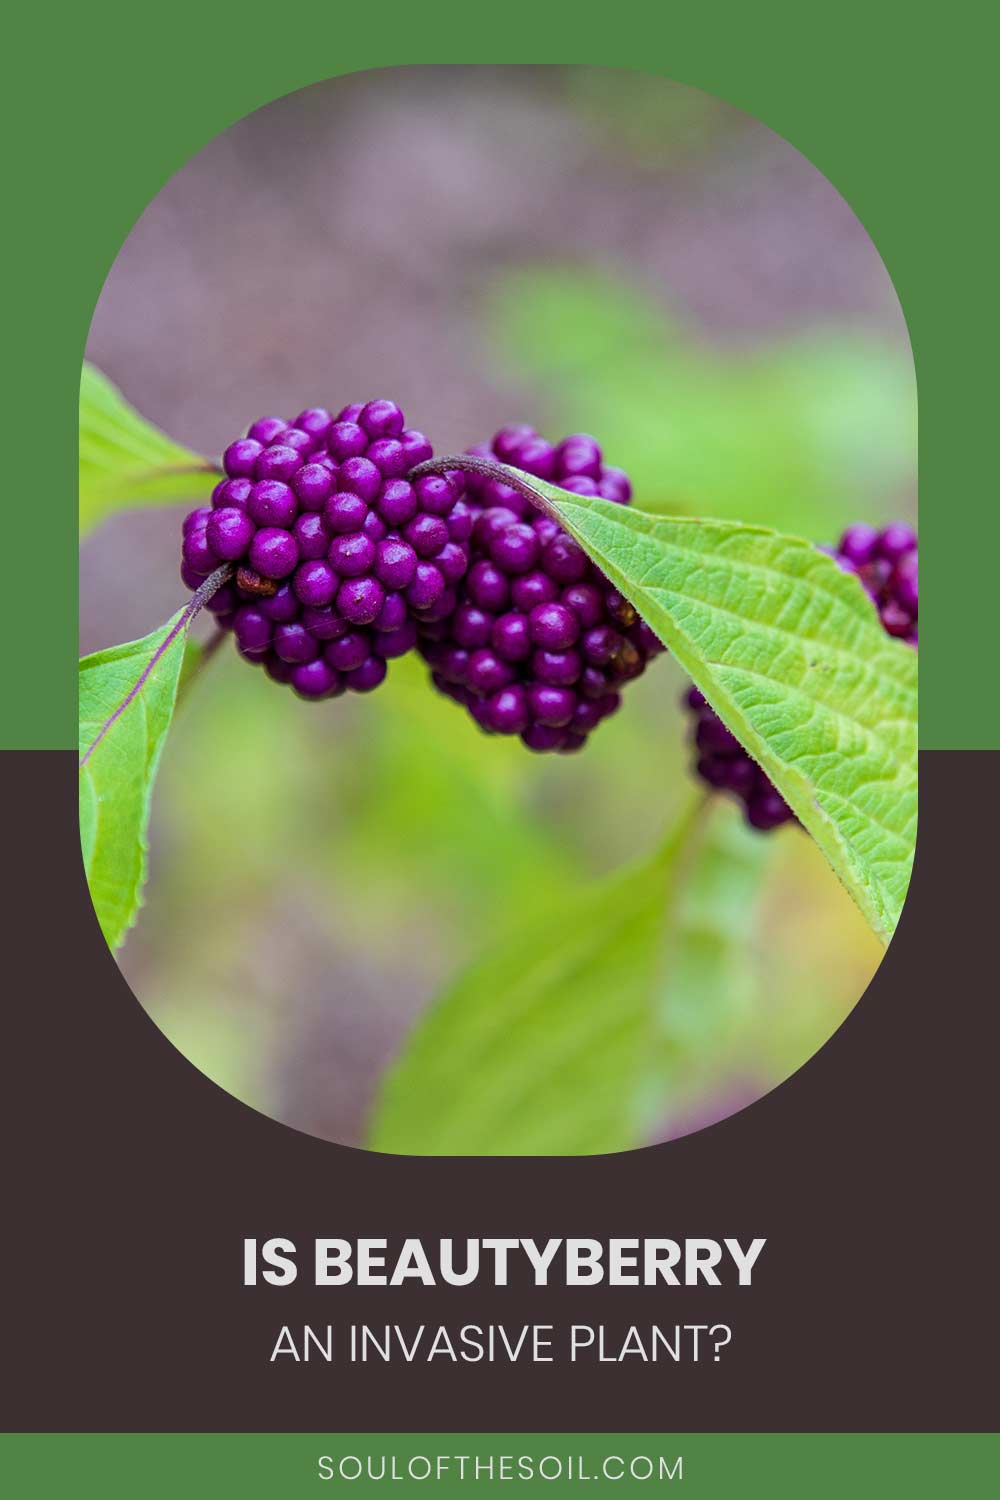 Is Beautyberry an Invasive Plant?